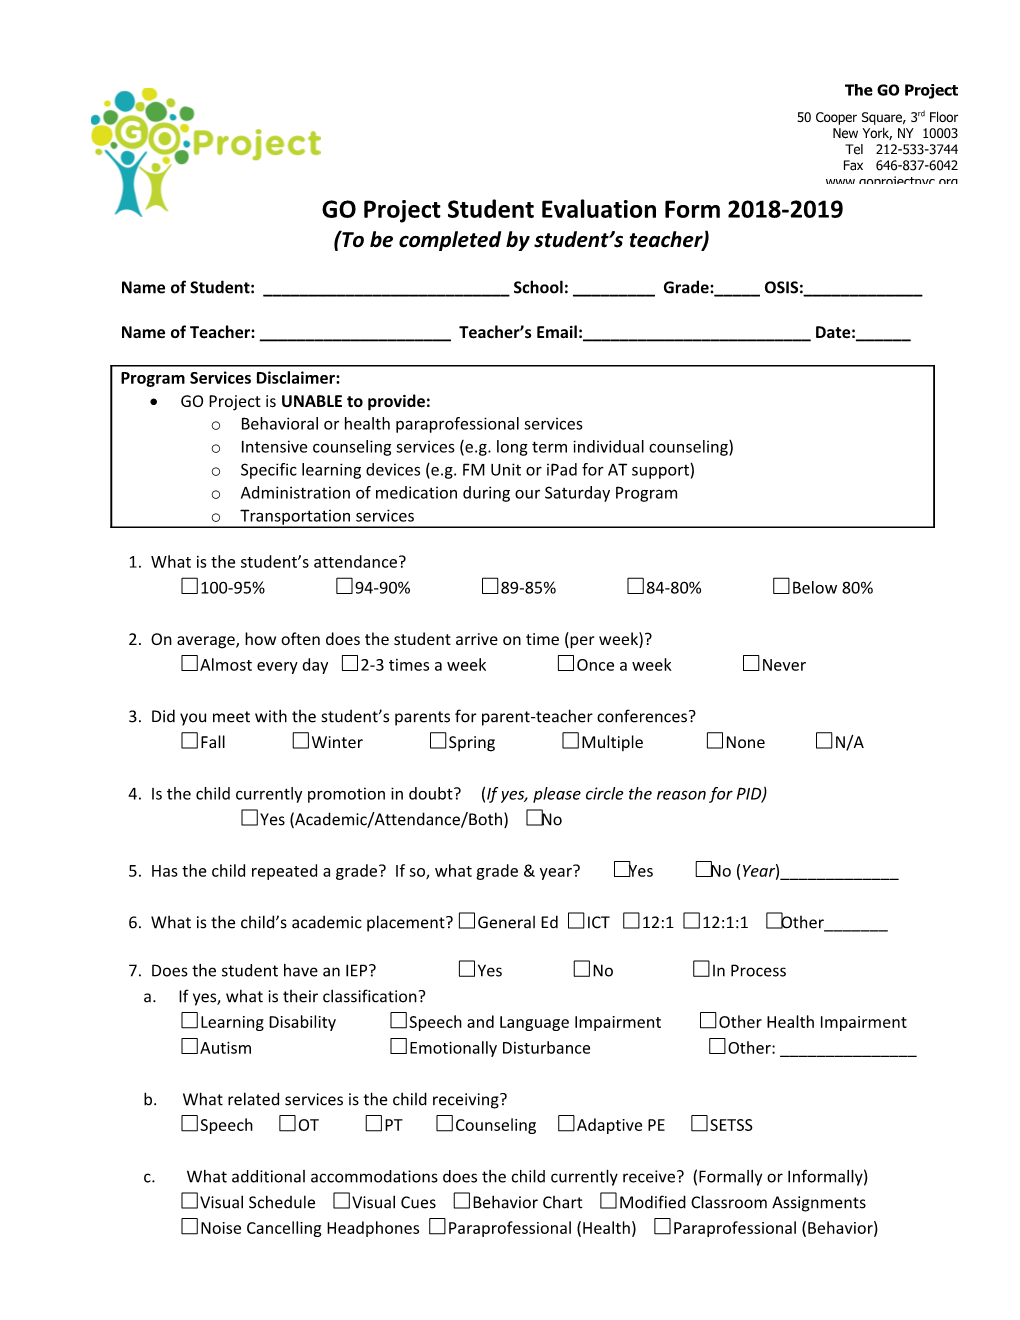 GO Project Student Evaluation Student Name ______